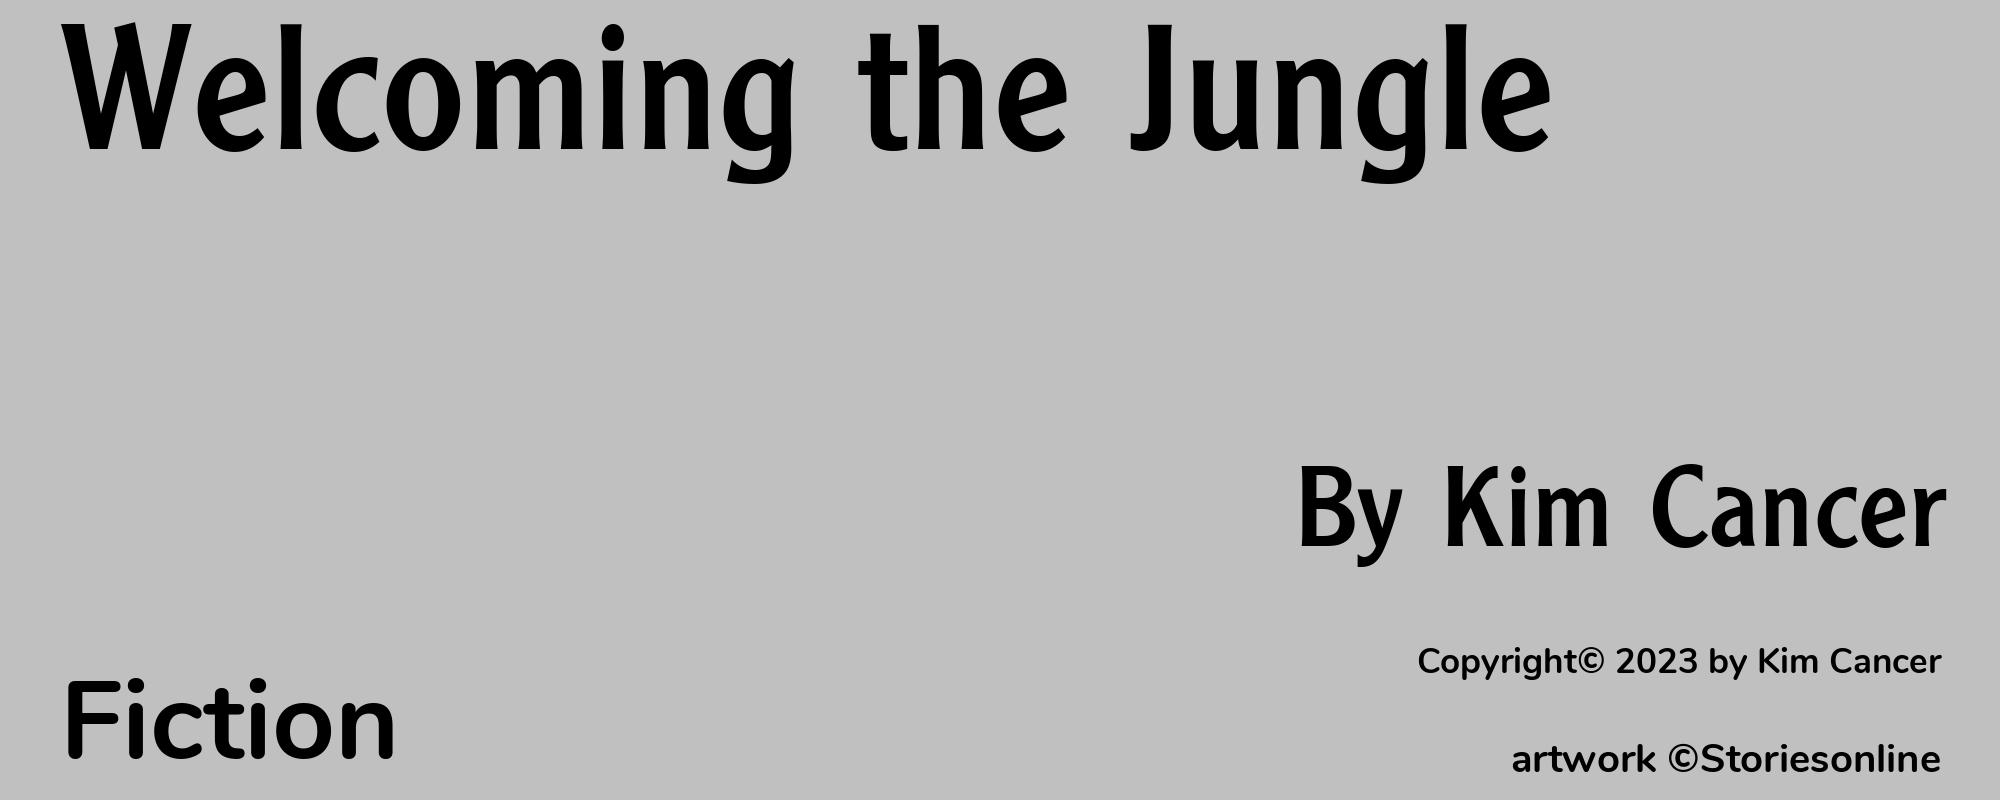 Welcoming the Jungle - Cover